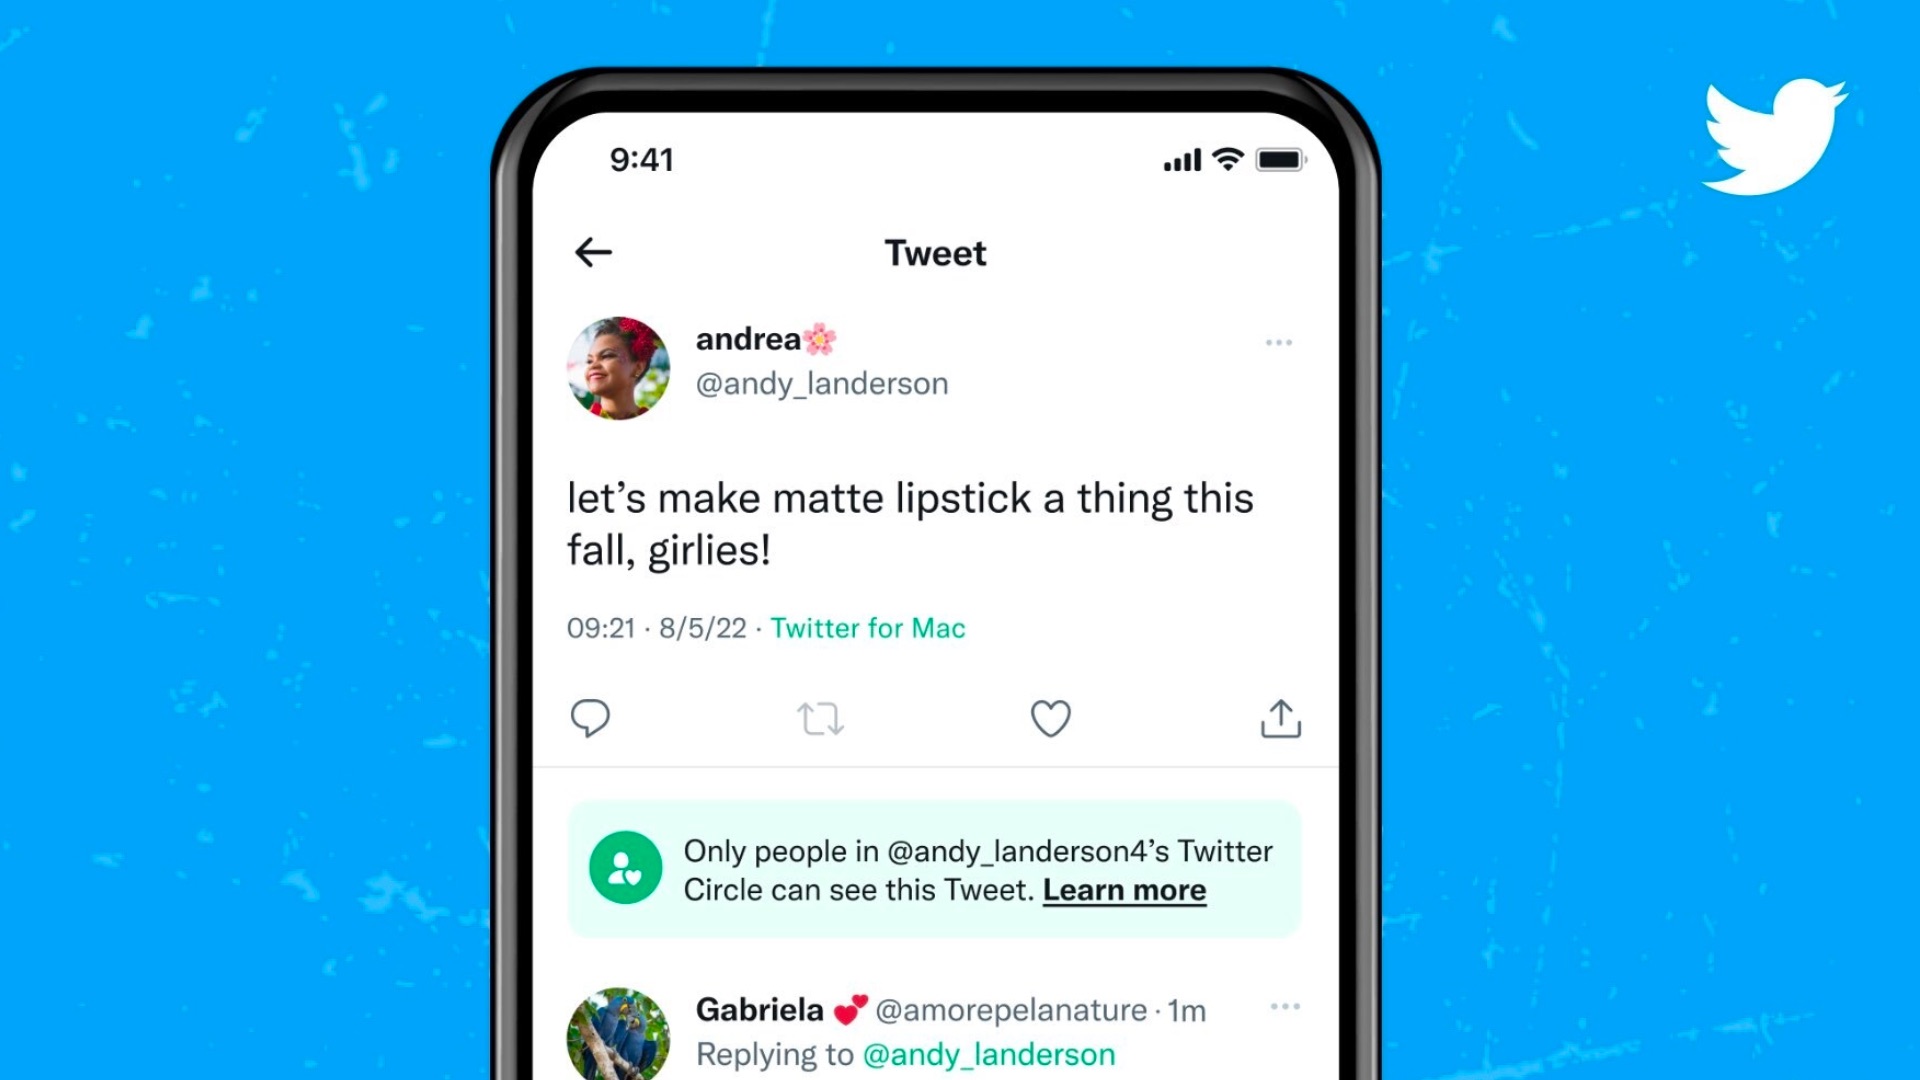 Twitter Launches ‘Twitter Circle’ for Sharing Tweets With a Smaller Number of People